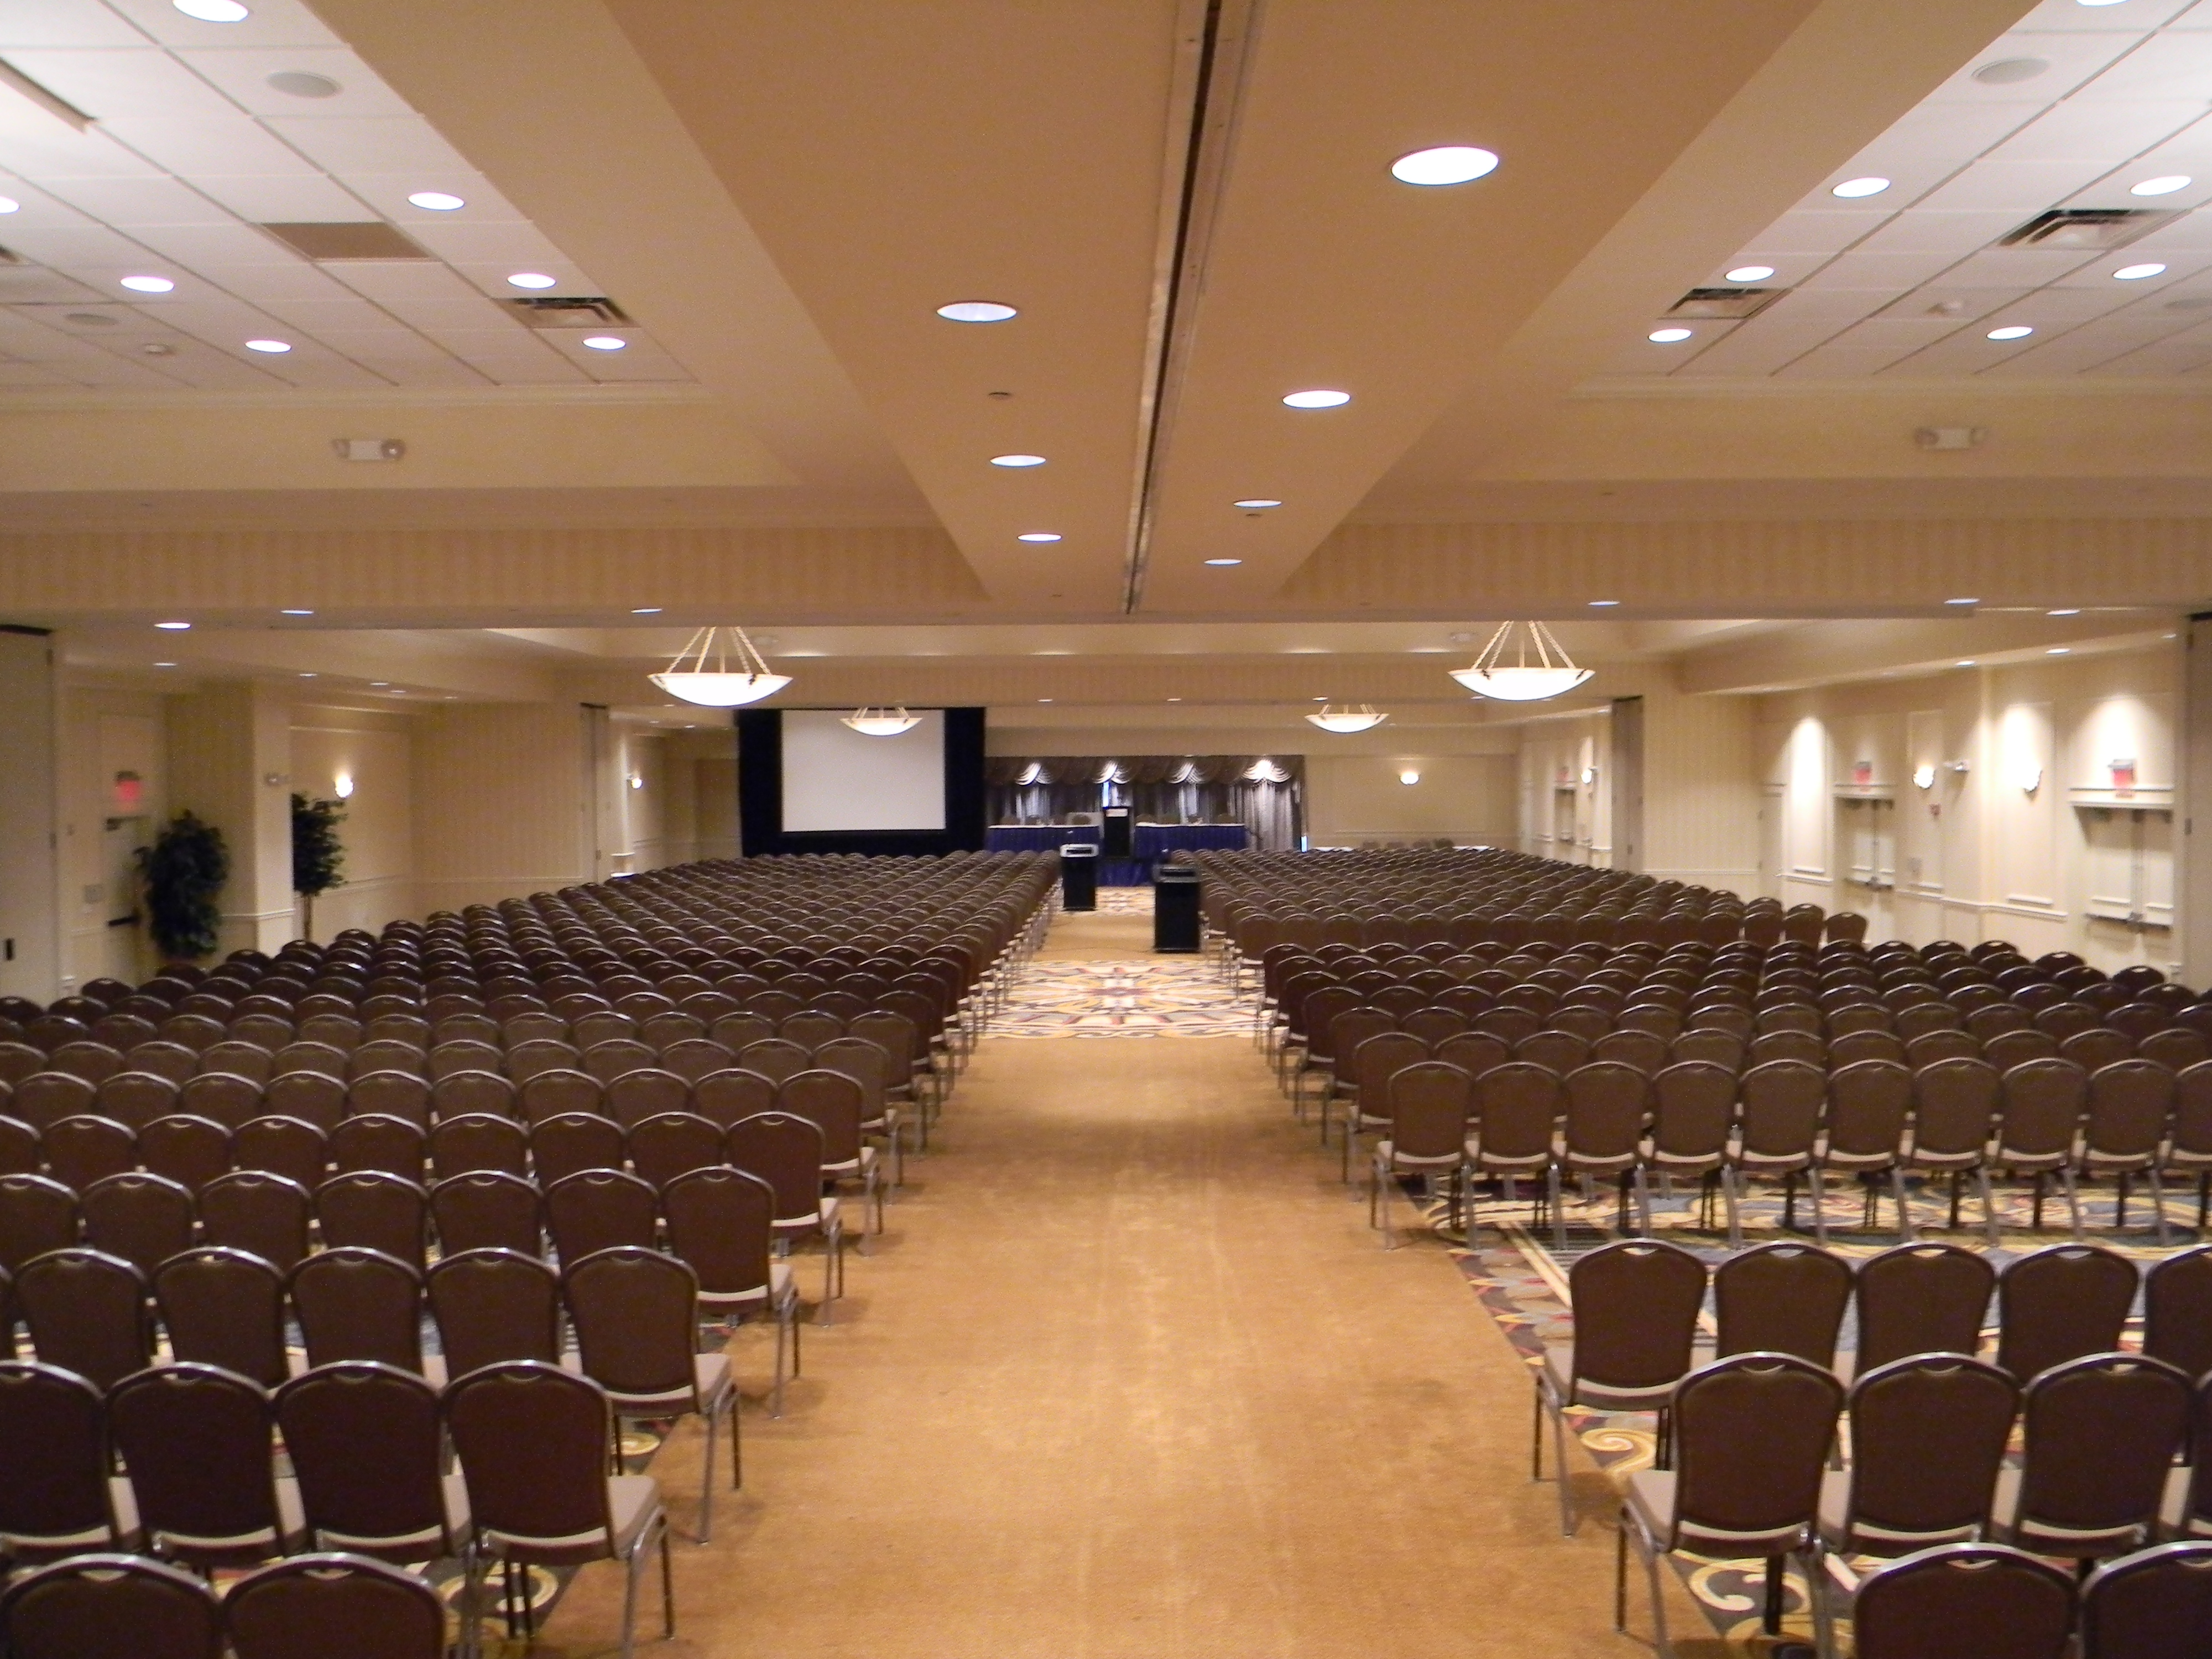 Grand Ballroom Arranged Theater Style With Rows of Chairs Facing Projector Screen and Stage